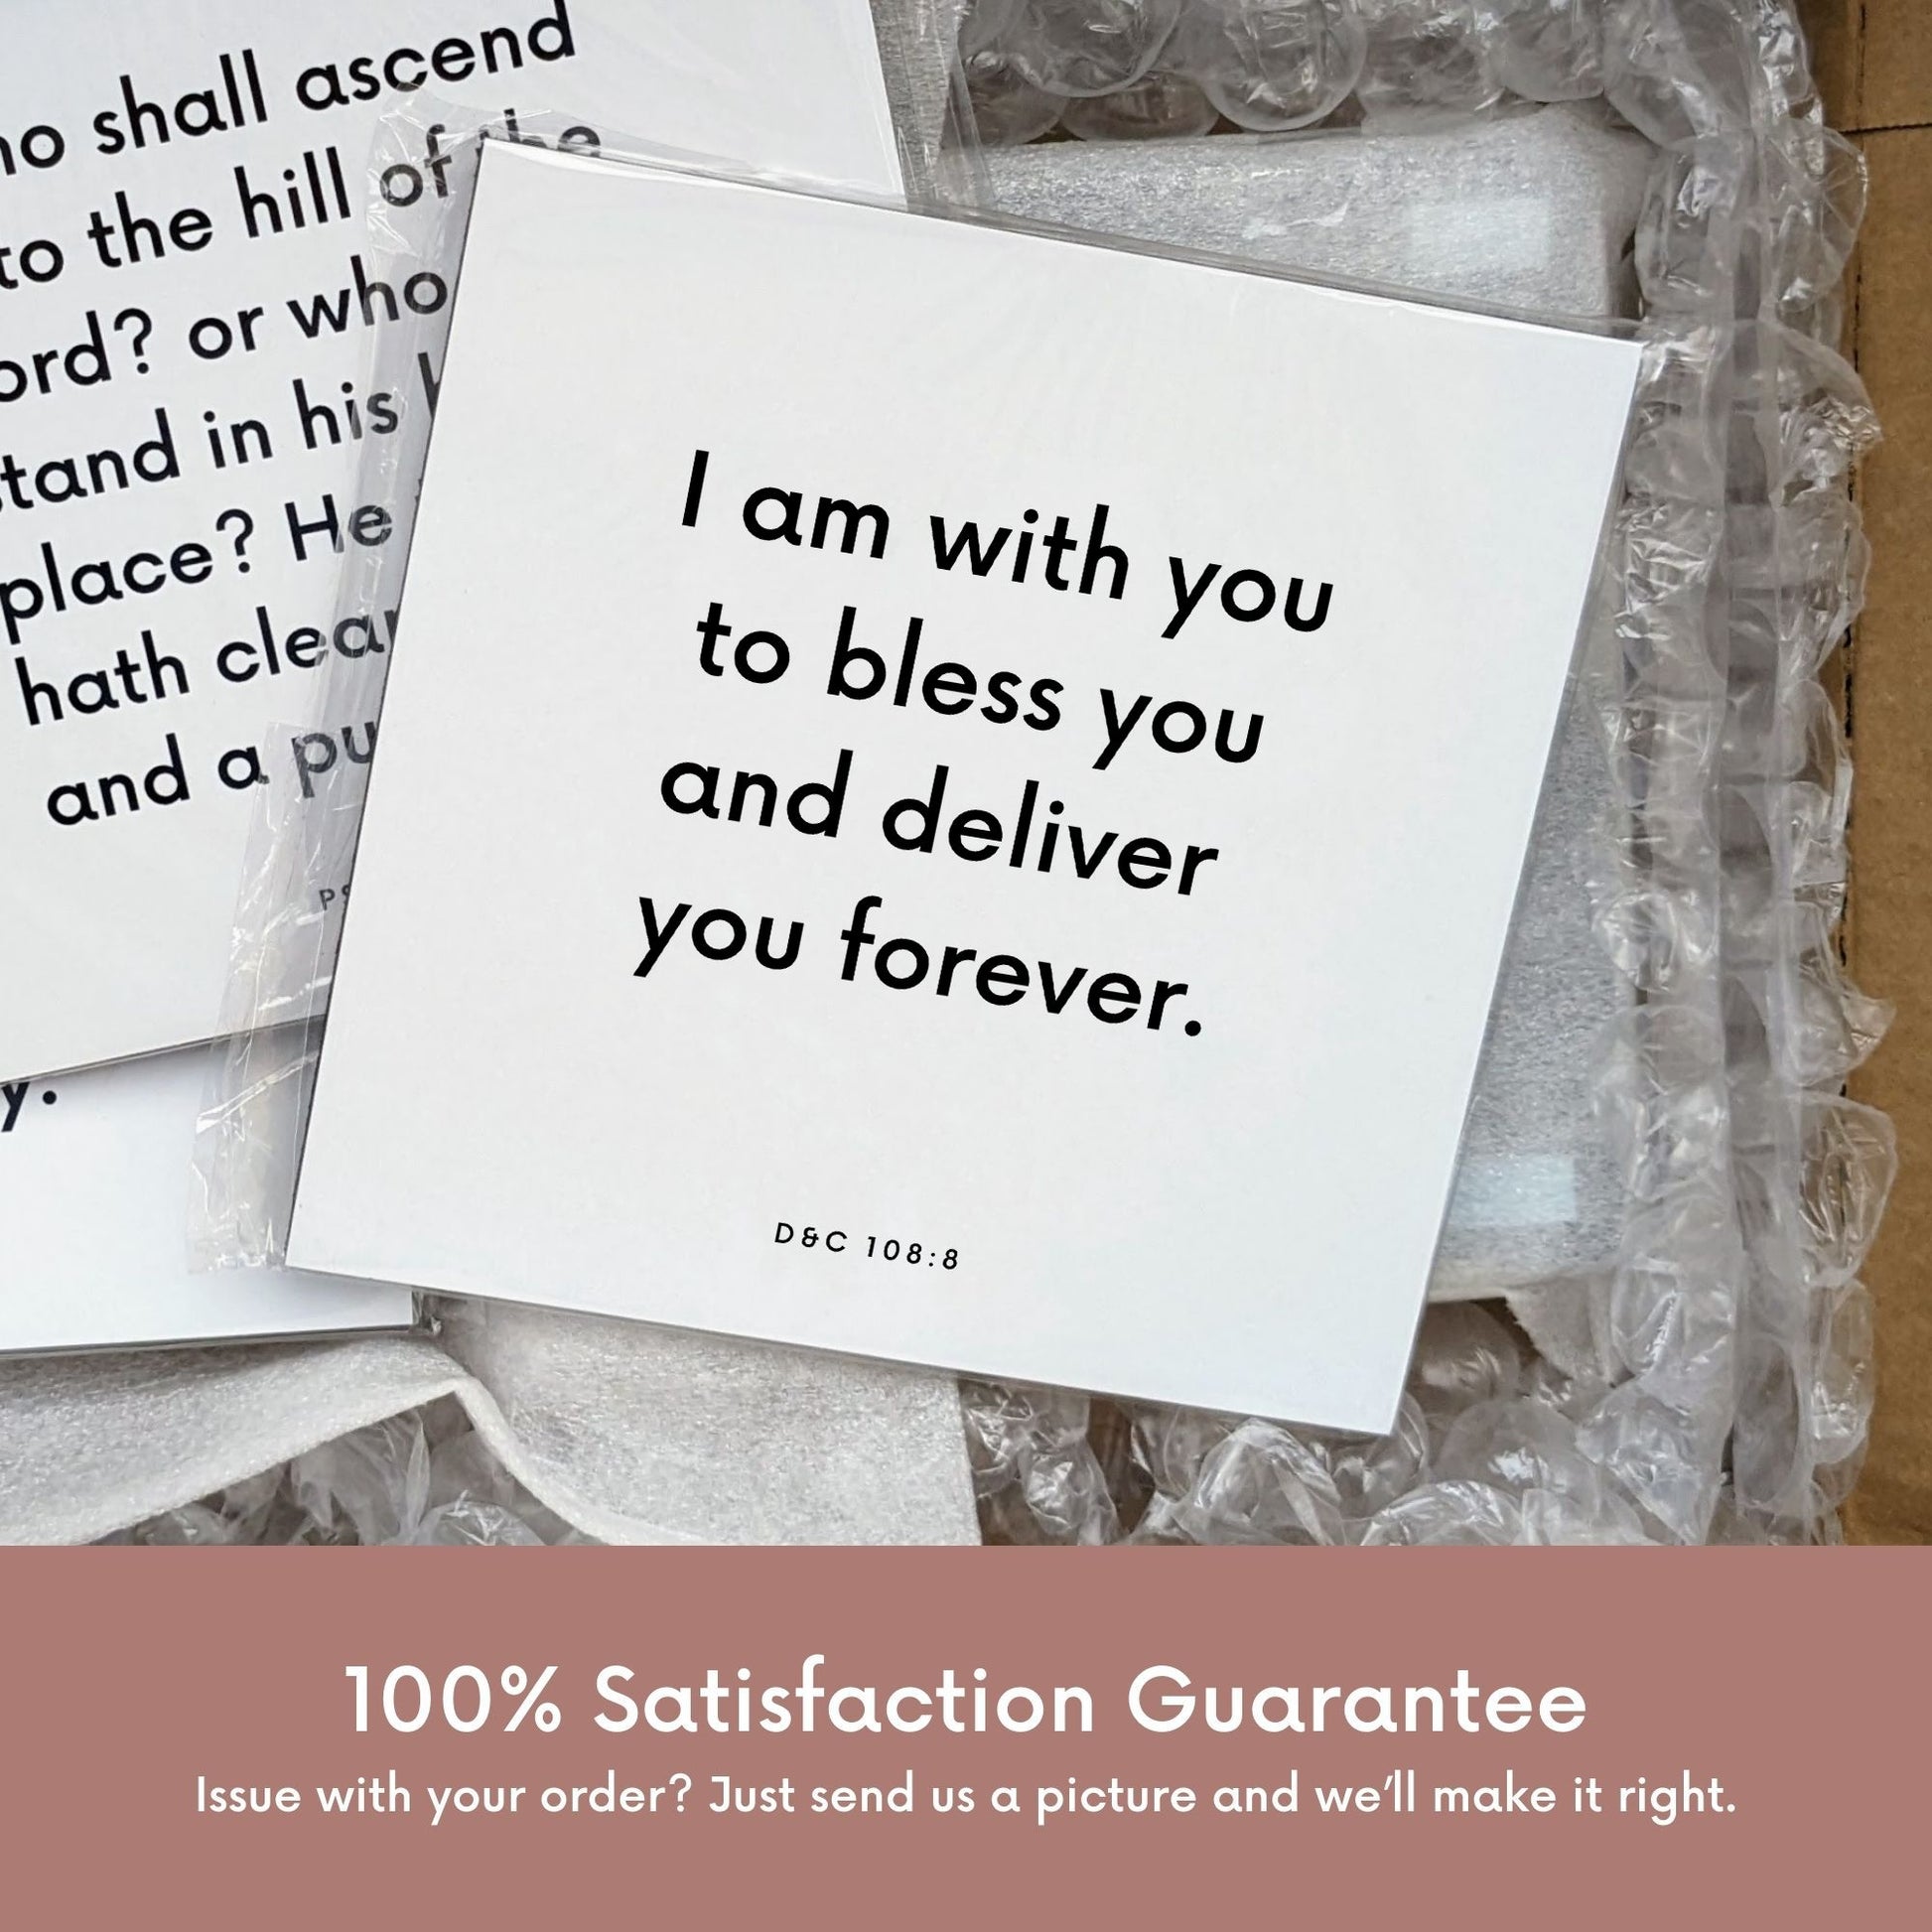 Shipping materials for scripture tile of D&C 108:8 - "I am with you to bless you and deliver you forever"